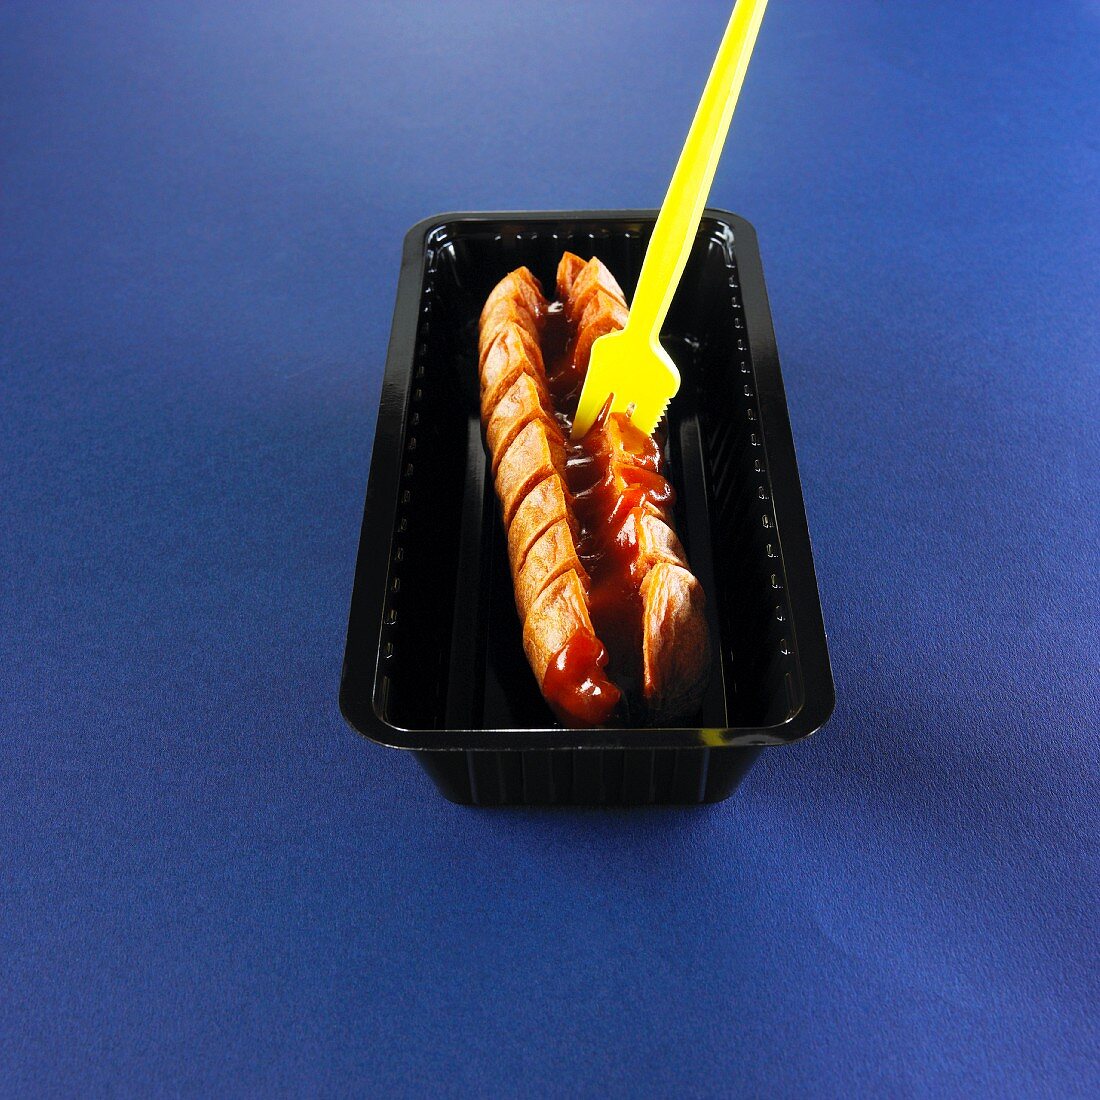 Cervelat (Swiss sausage) with ketchup and a fork